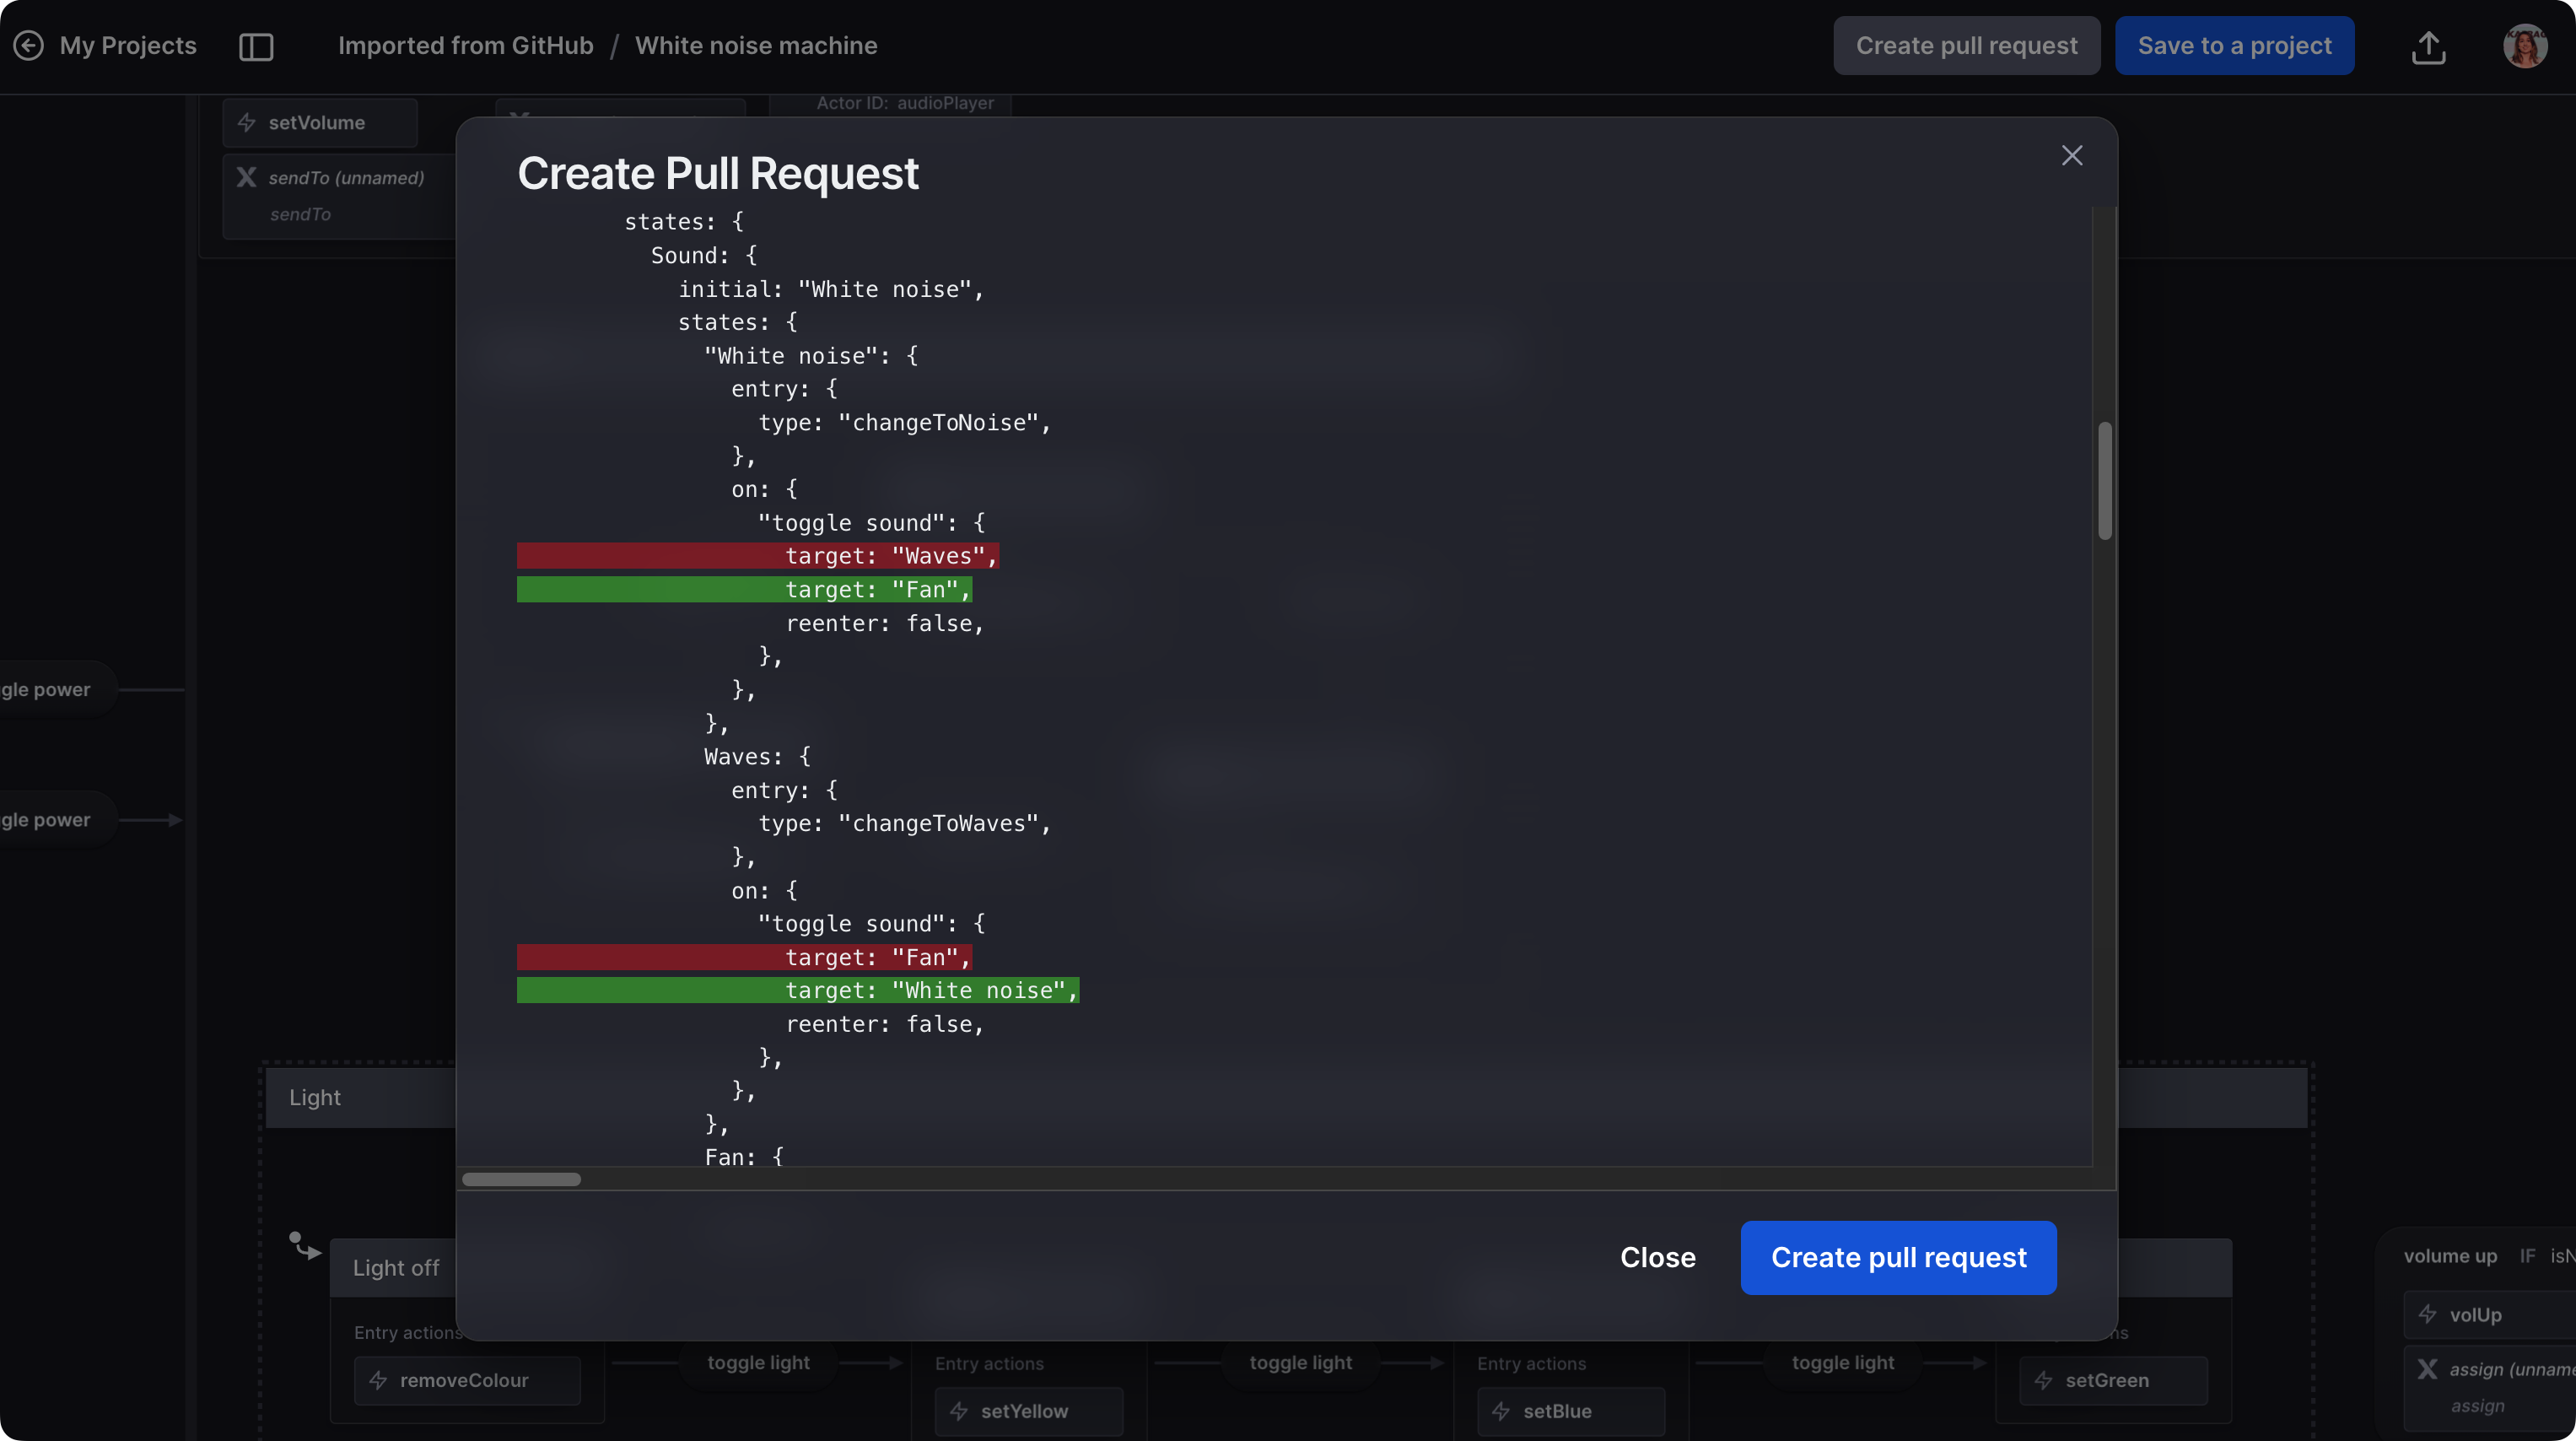 The pull request modal in Stately Studio showing deleted lines of code in red and inserted lines of code in green.